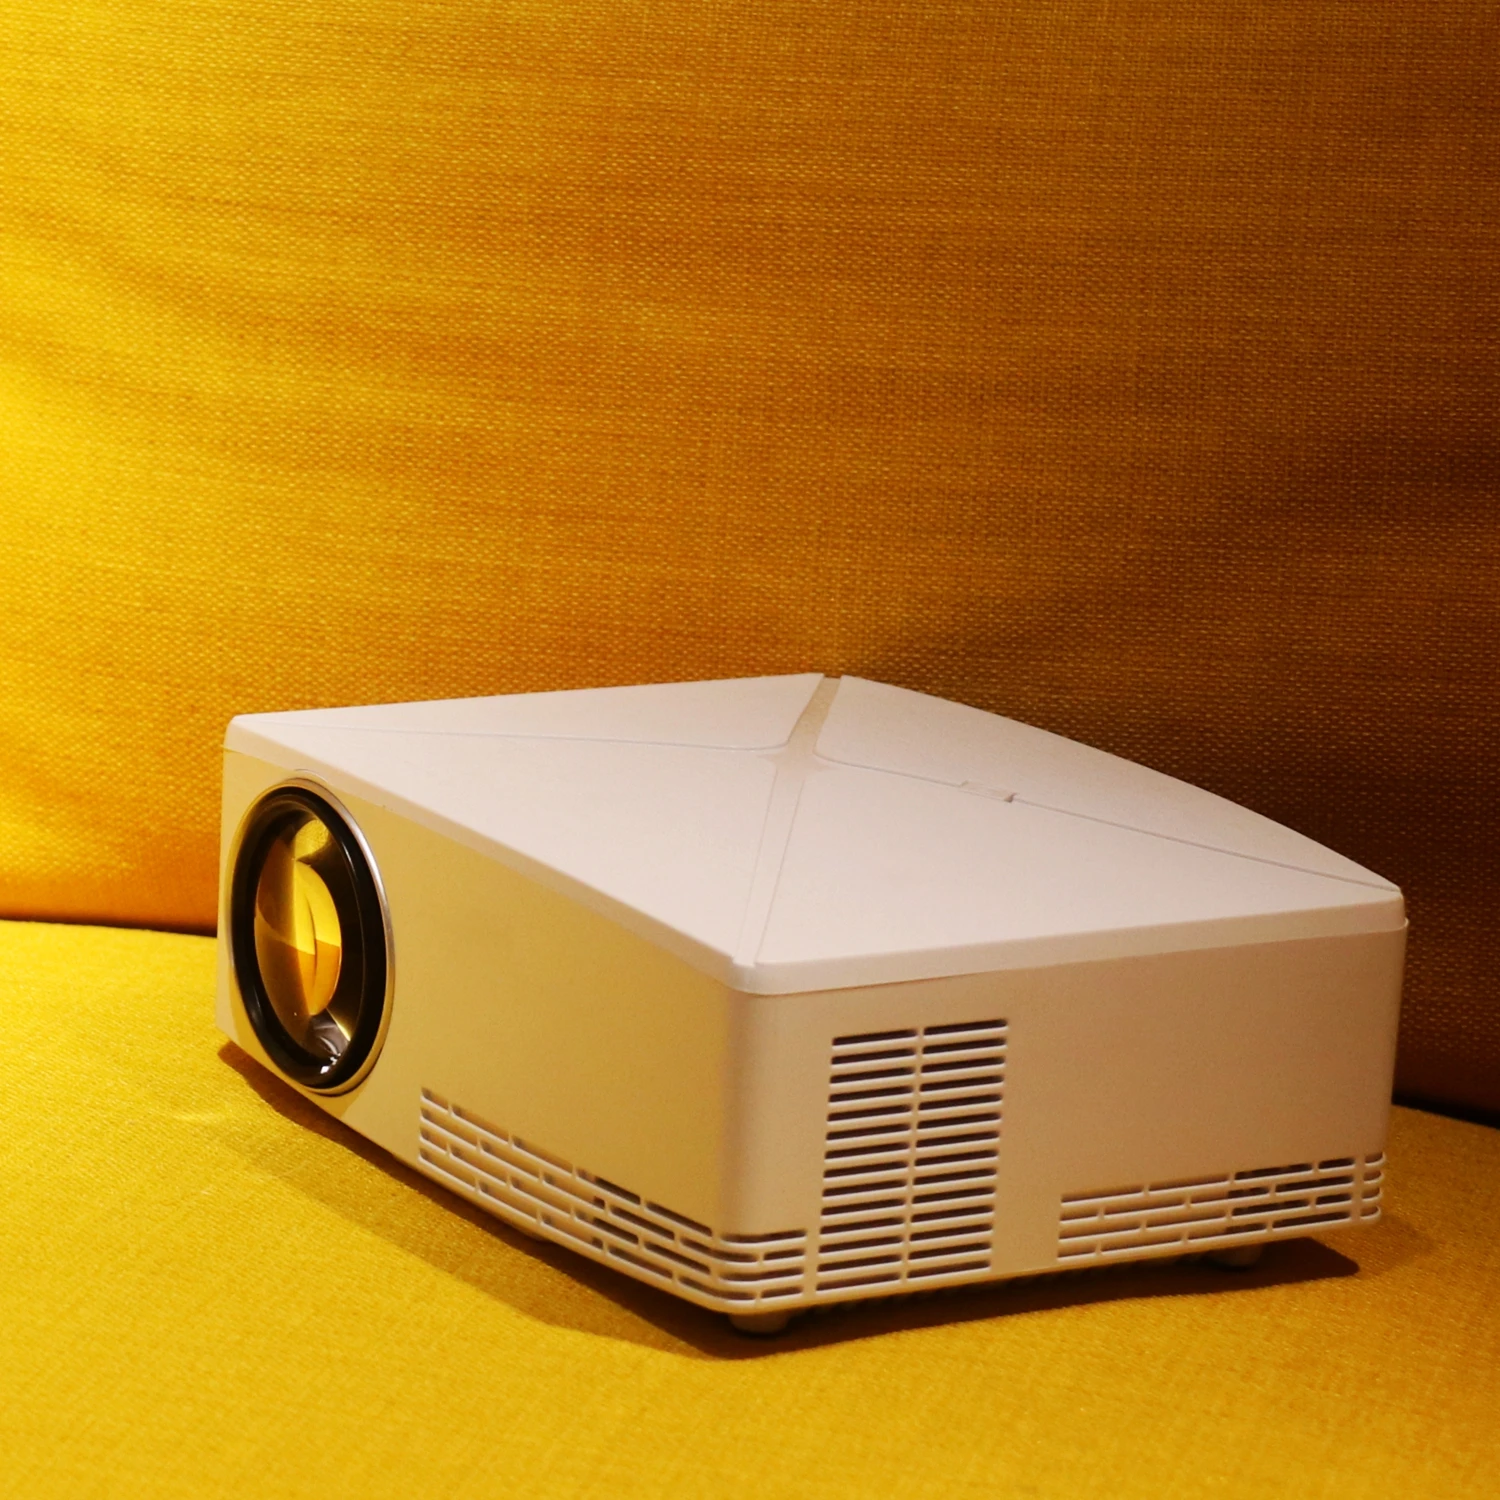 
Newest OEM C80 mobile projector pico mini projector hologram projector 